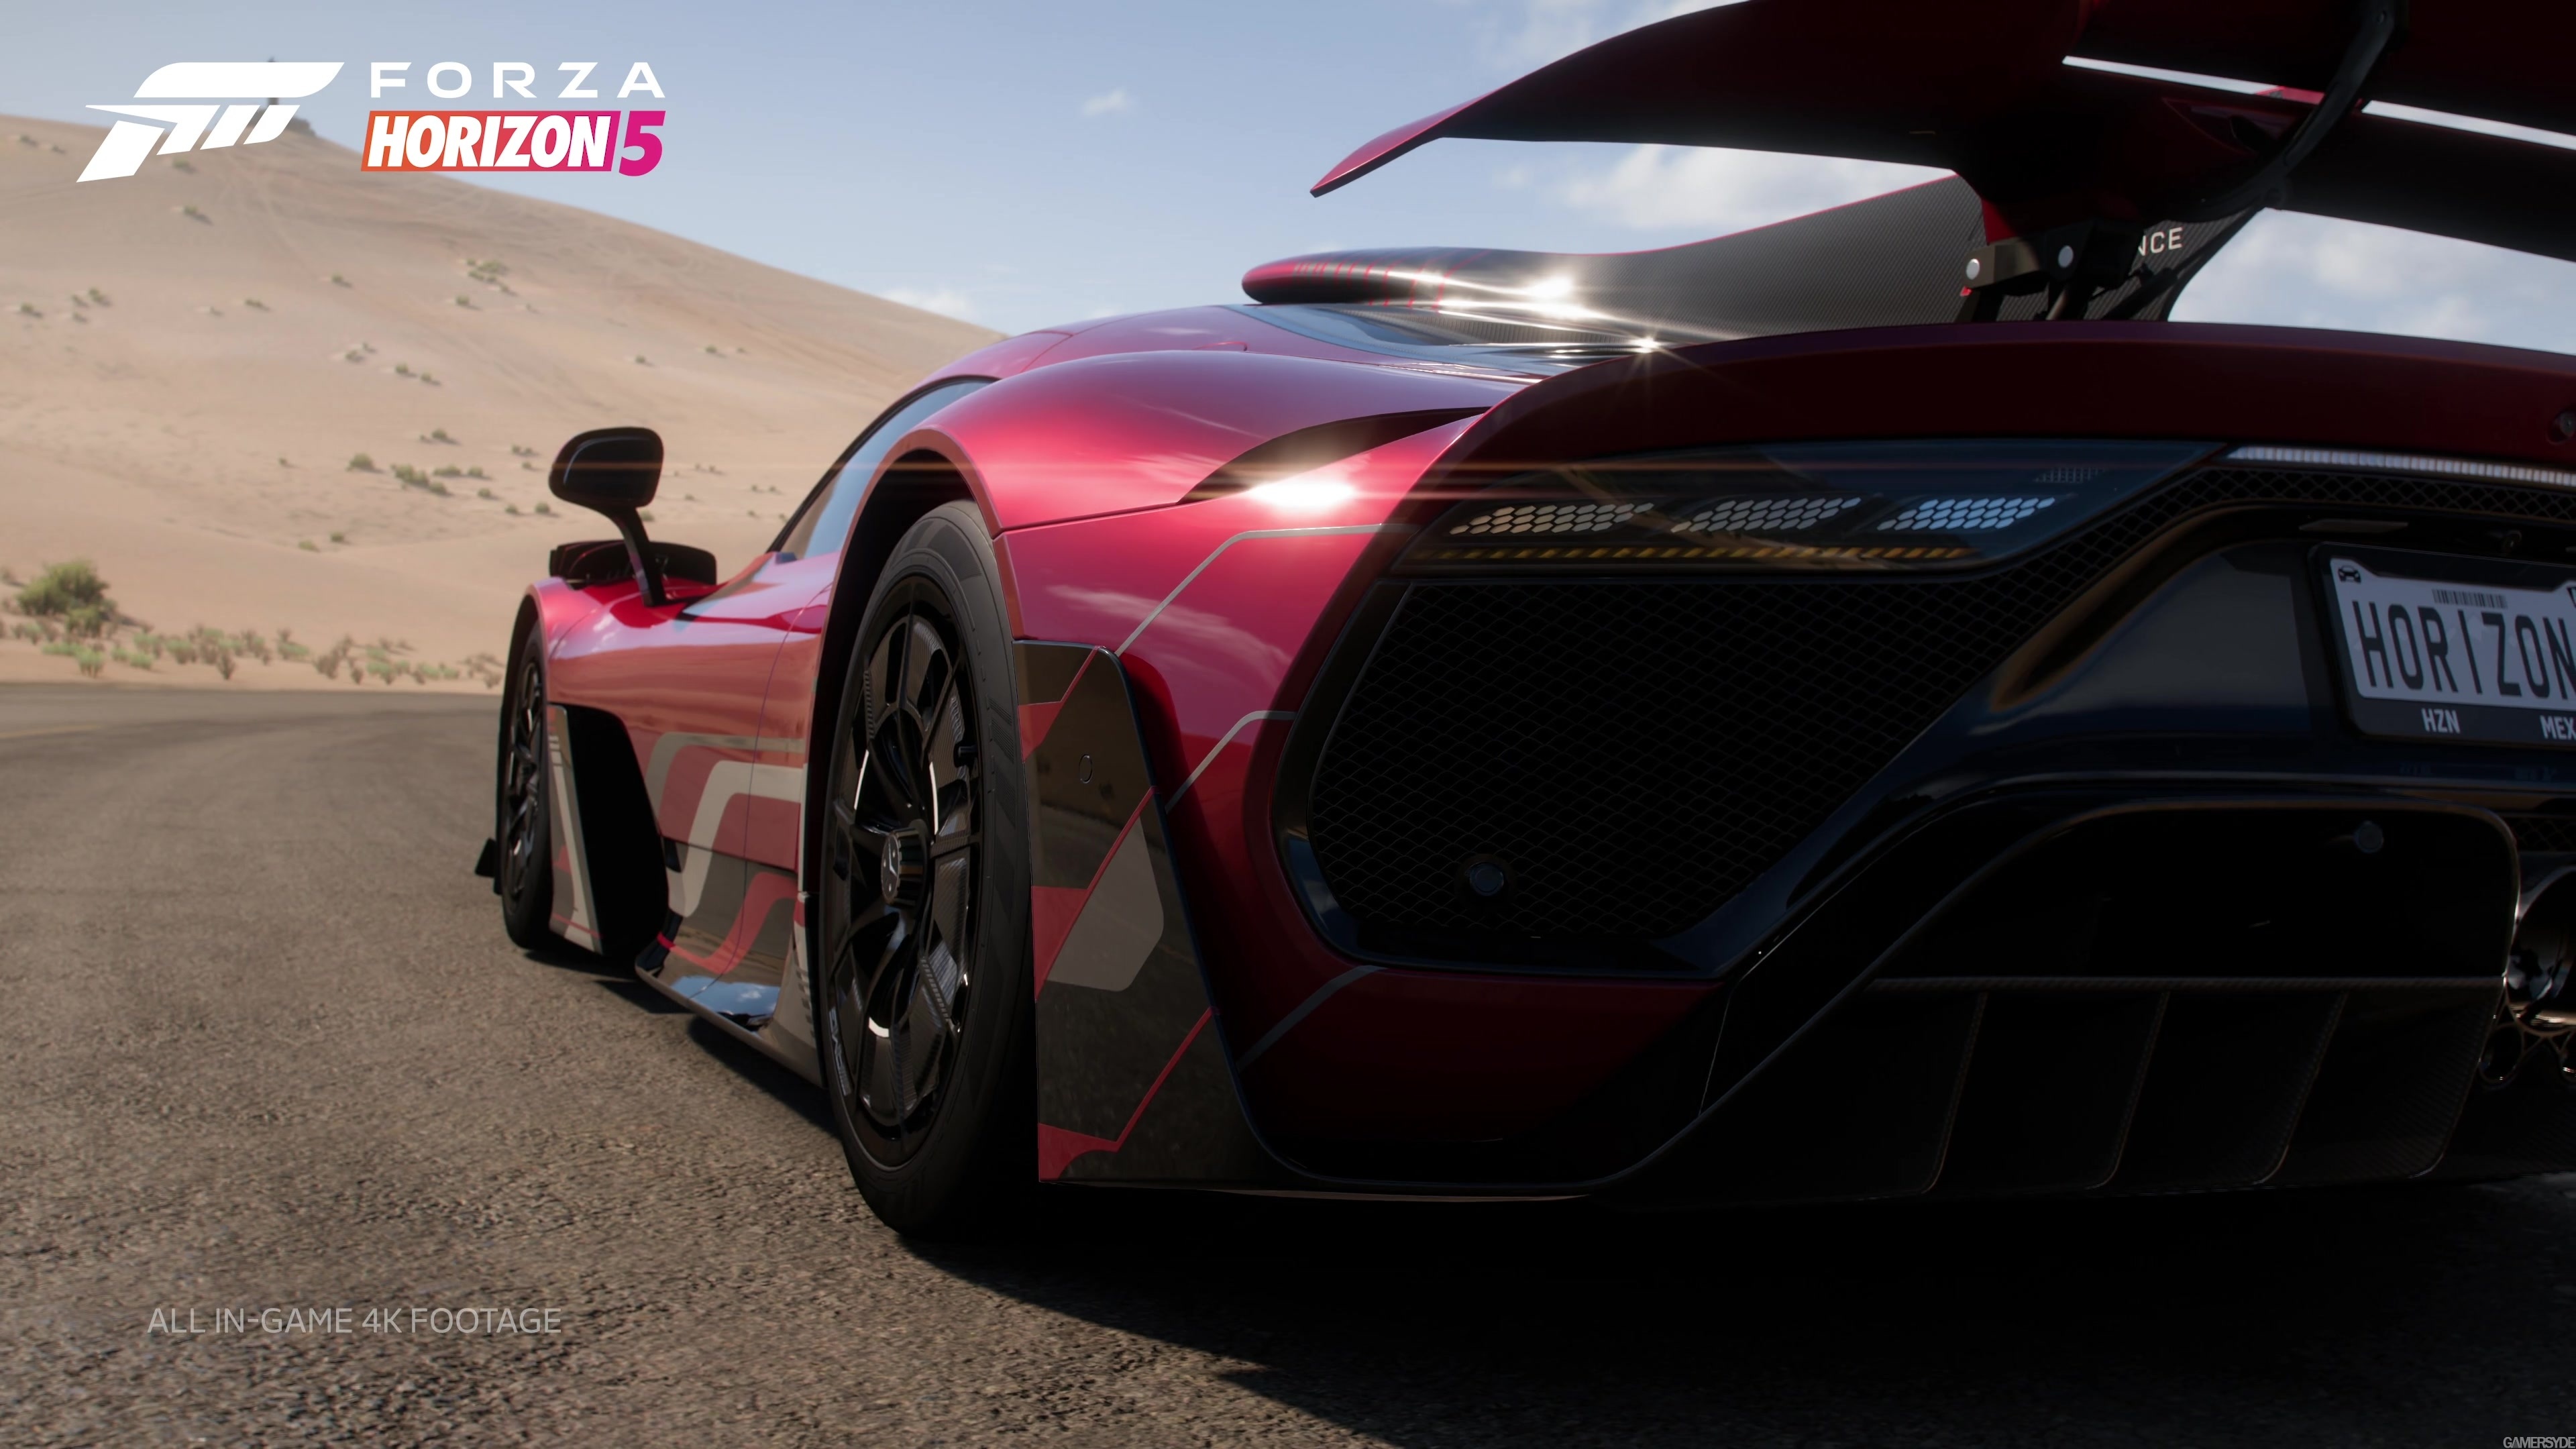 Forza Horizon 5 Announce Trailer High quality stream and download